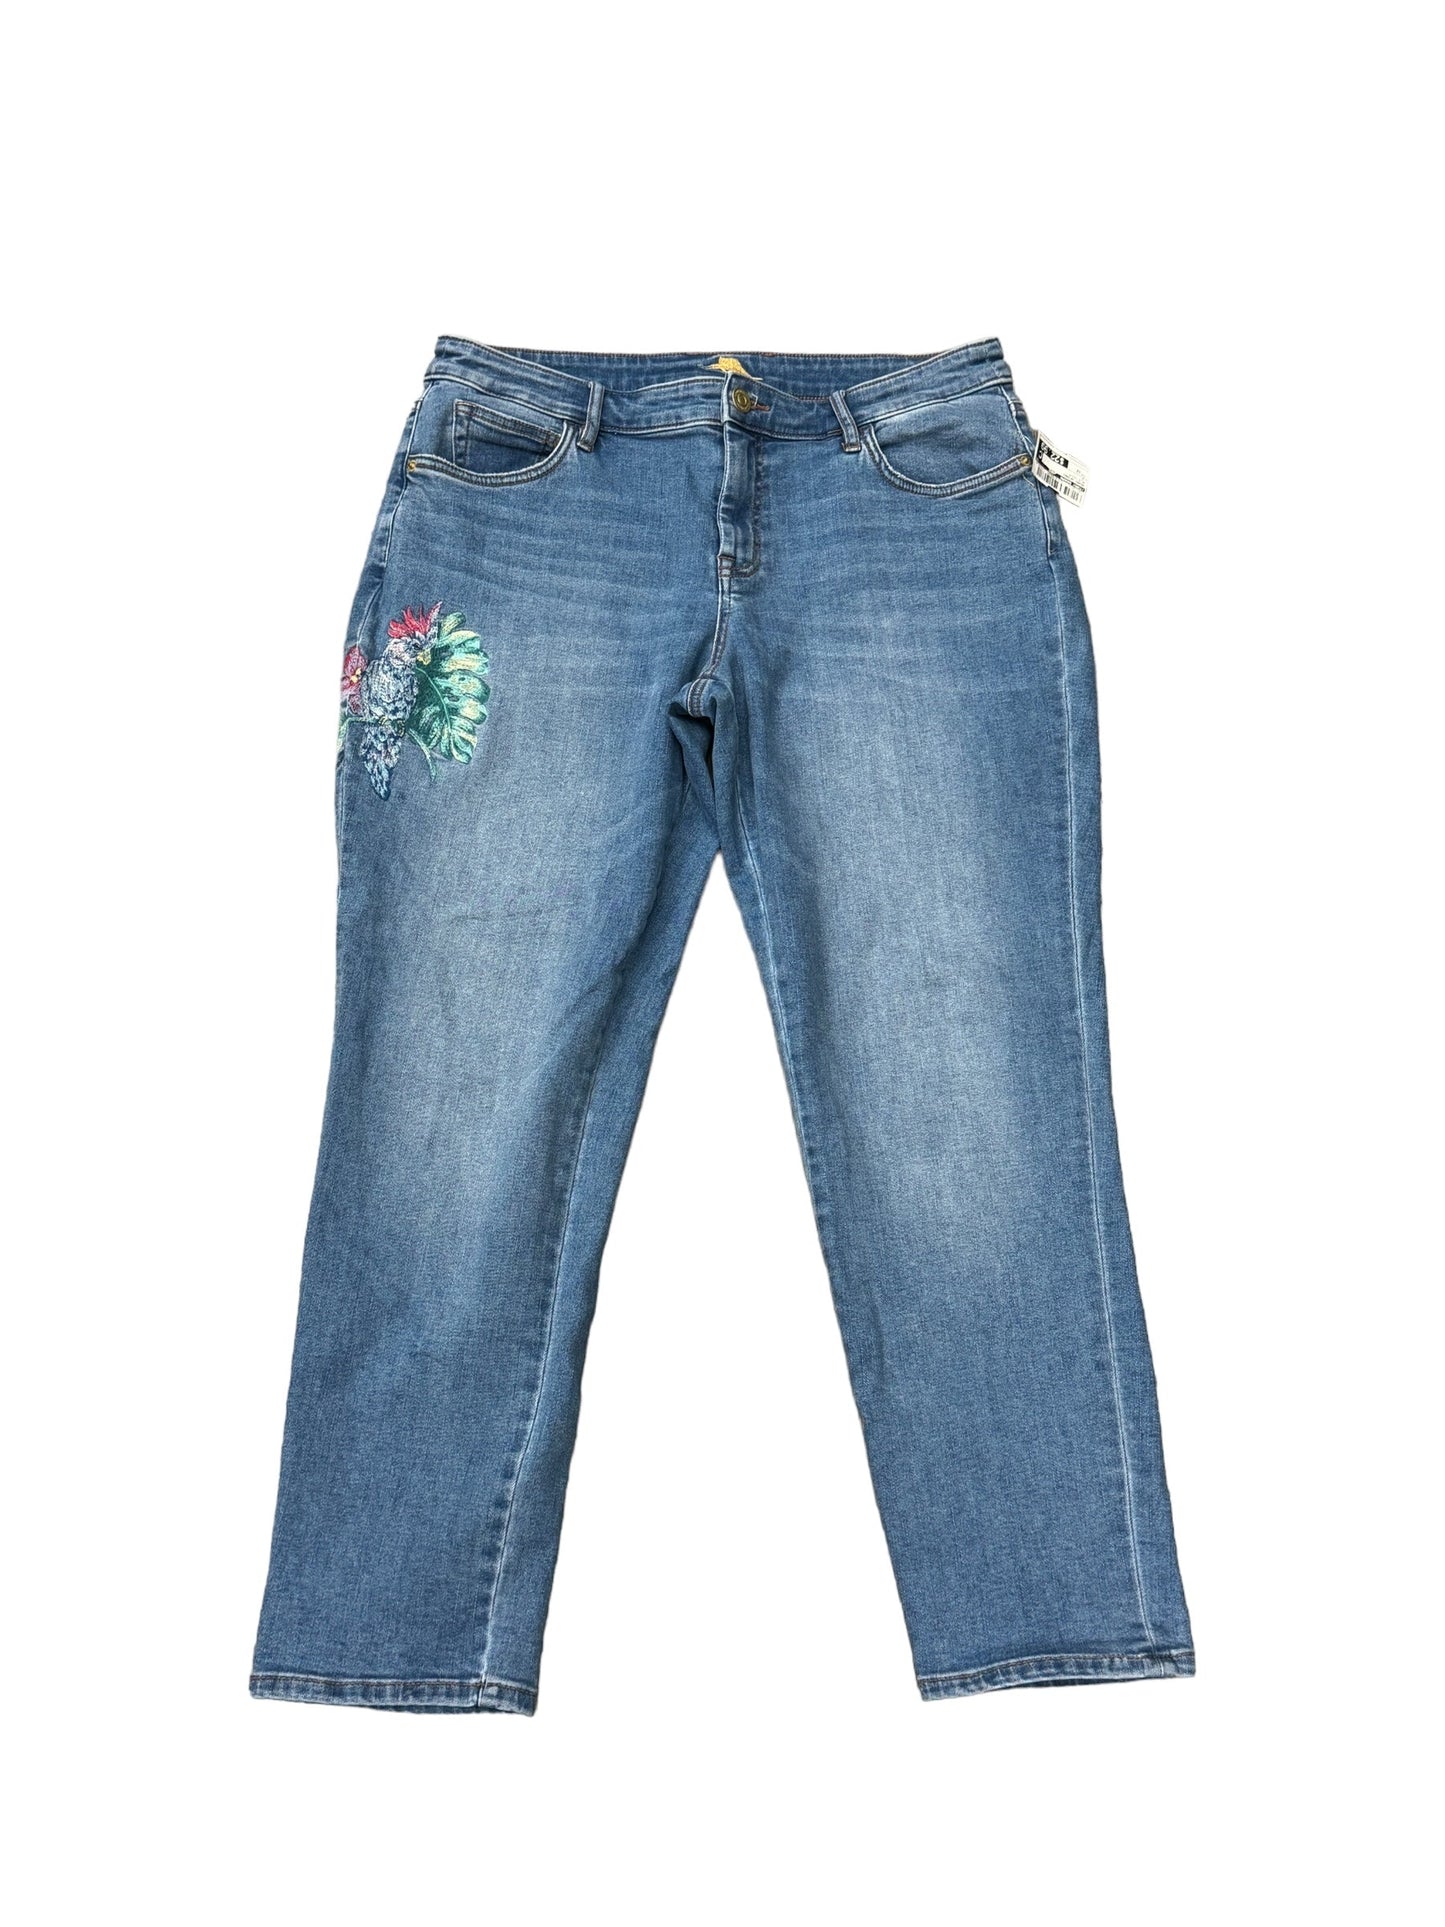 Jeans Skinny By Tommy Bahama  Size: 12